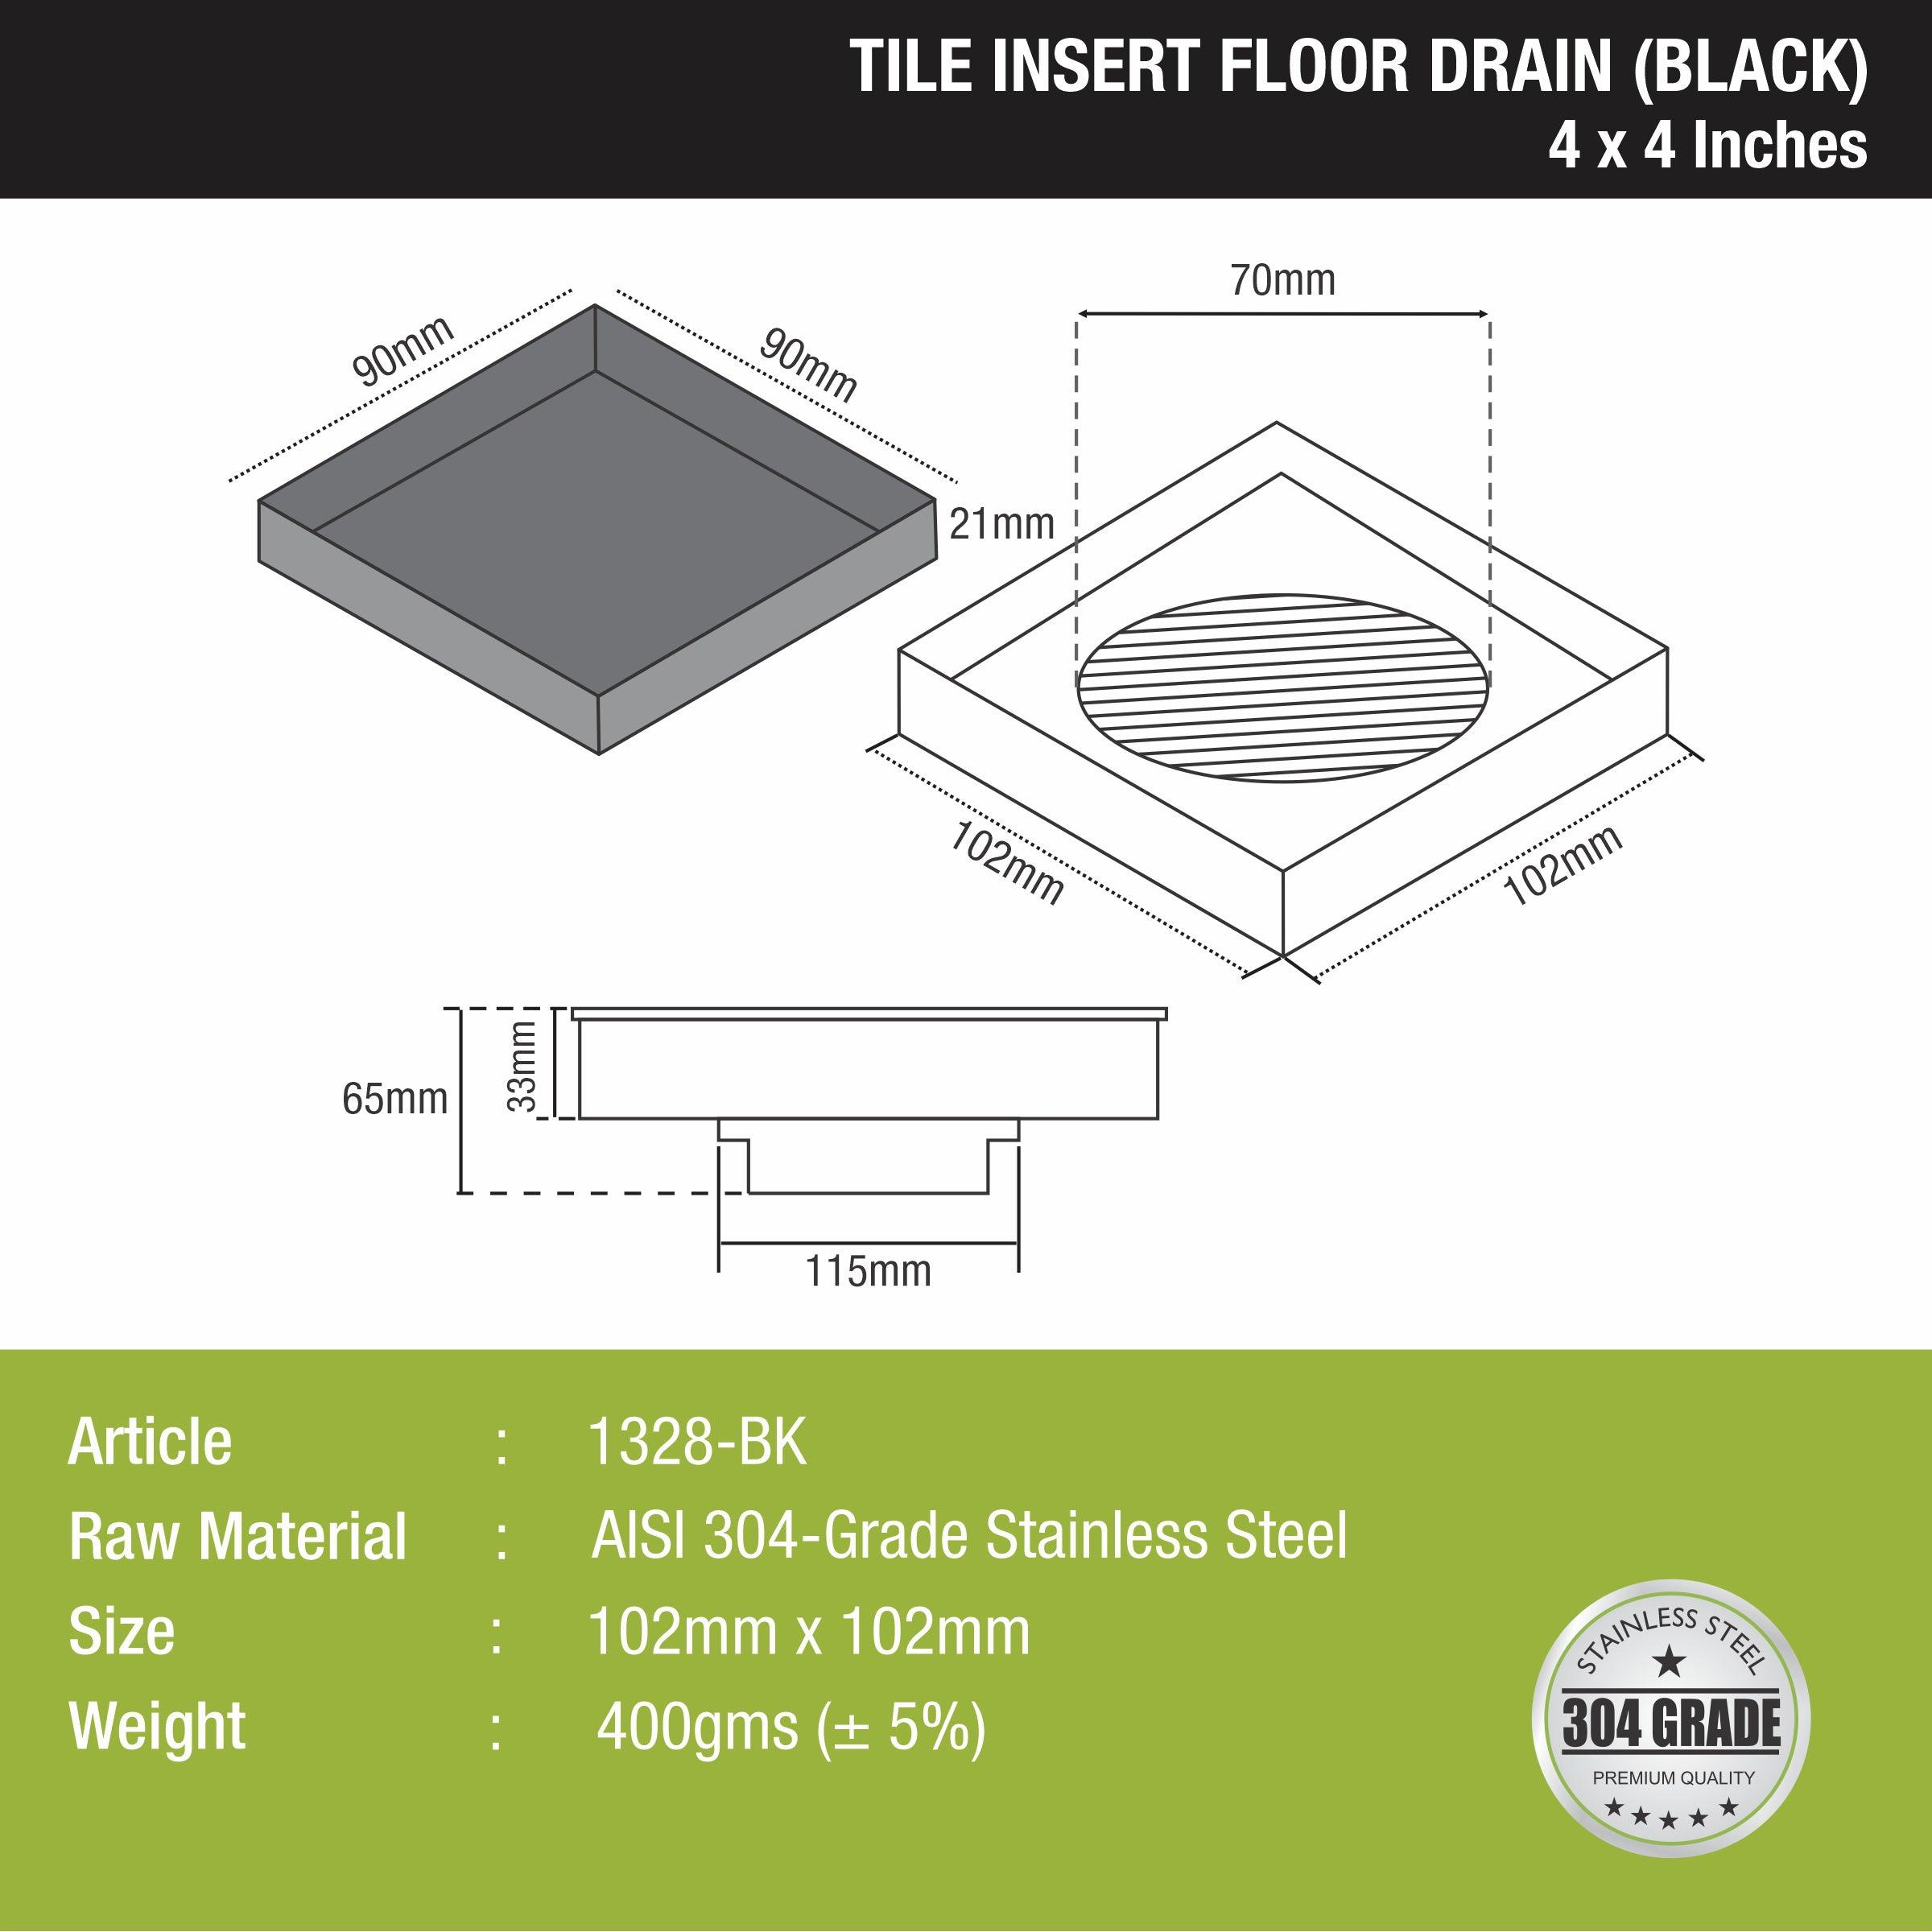 Tile Insert Square Floor Drain - Black (4 x 4 Inches) size and details